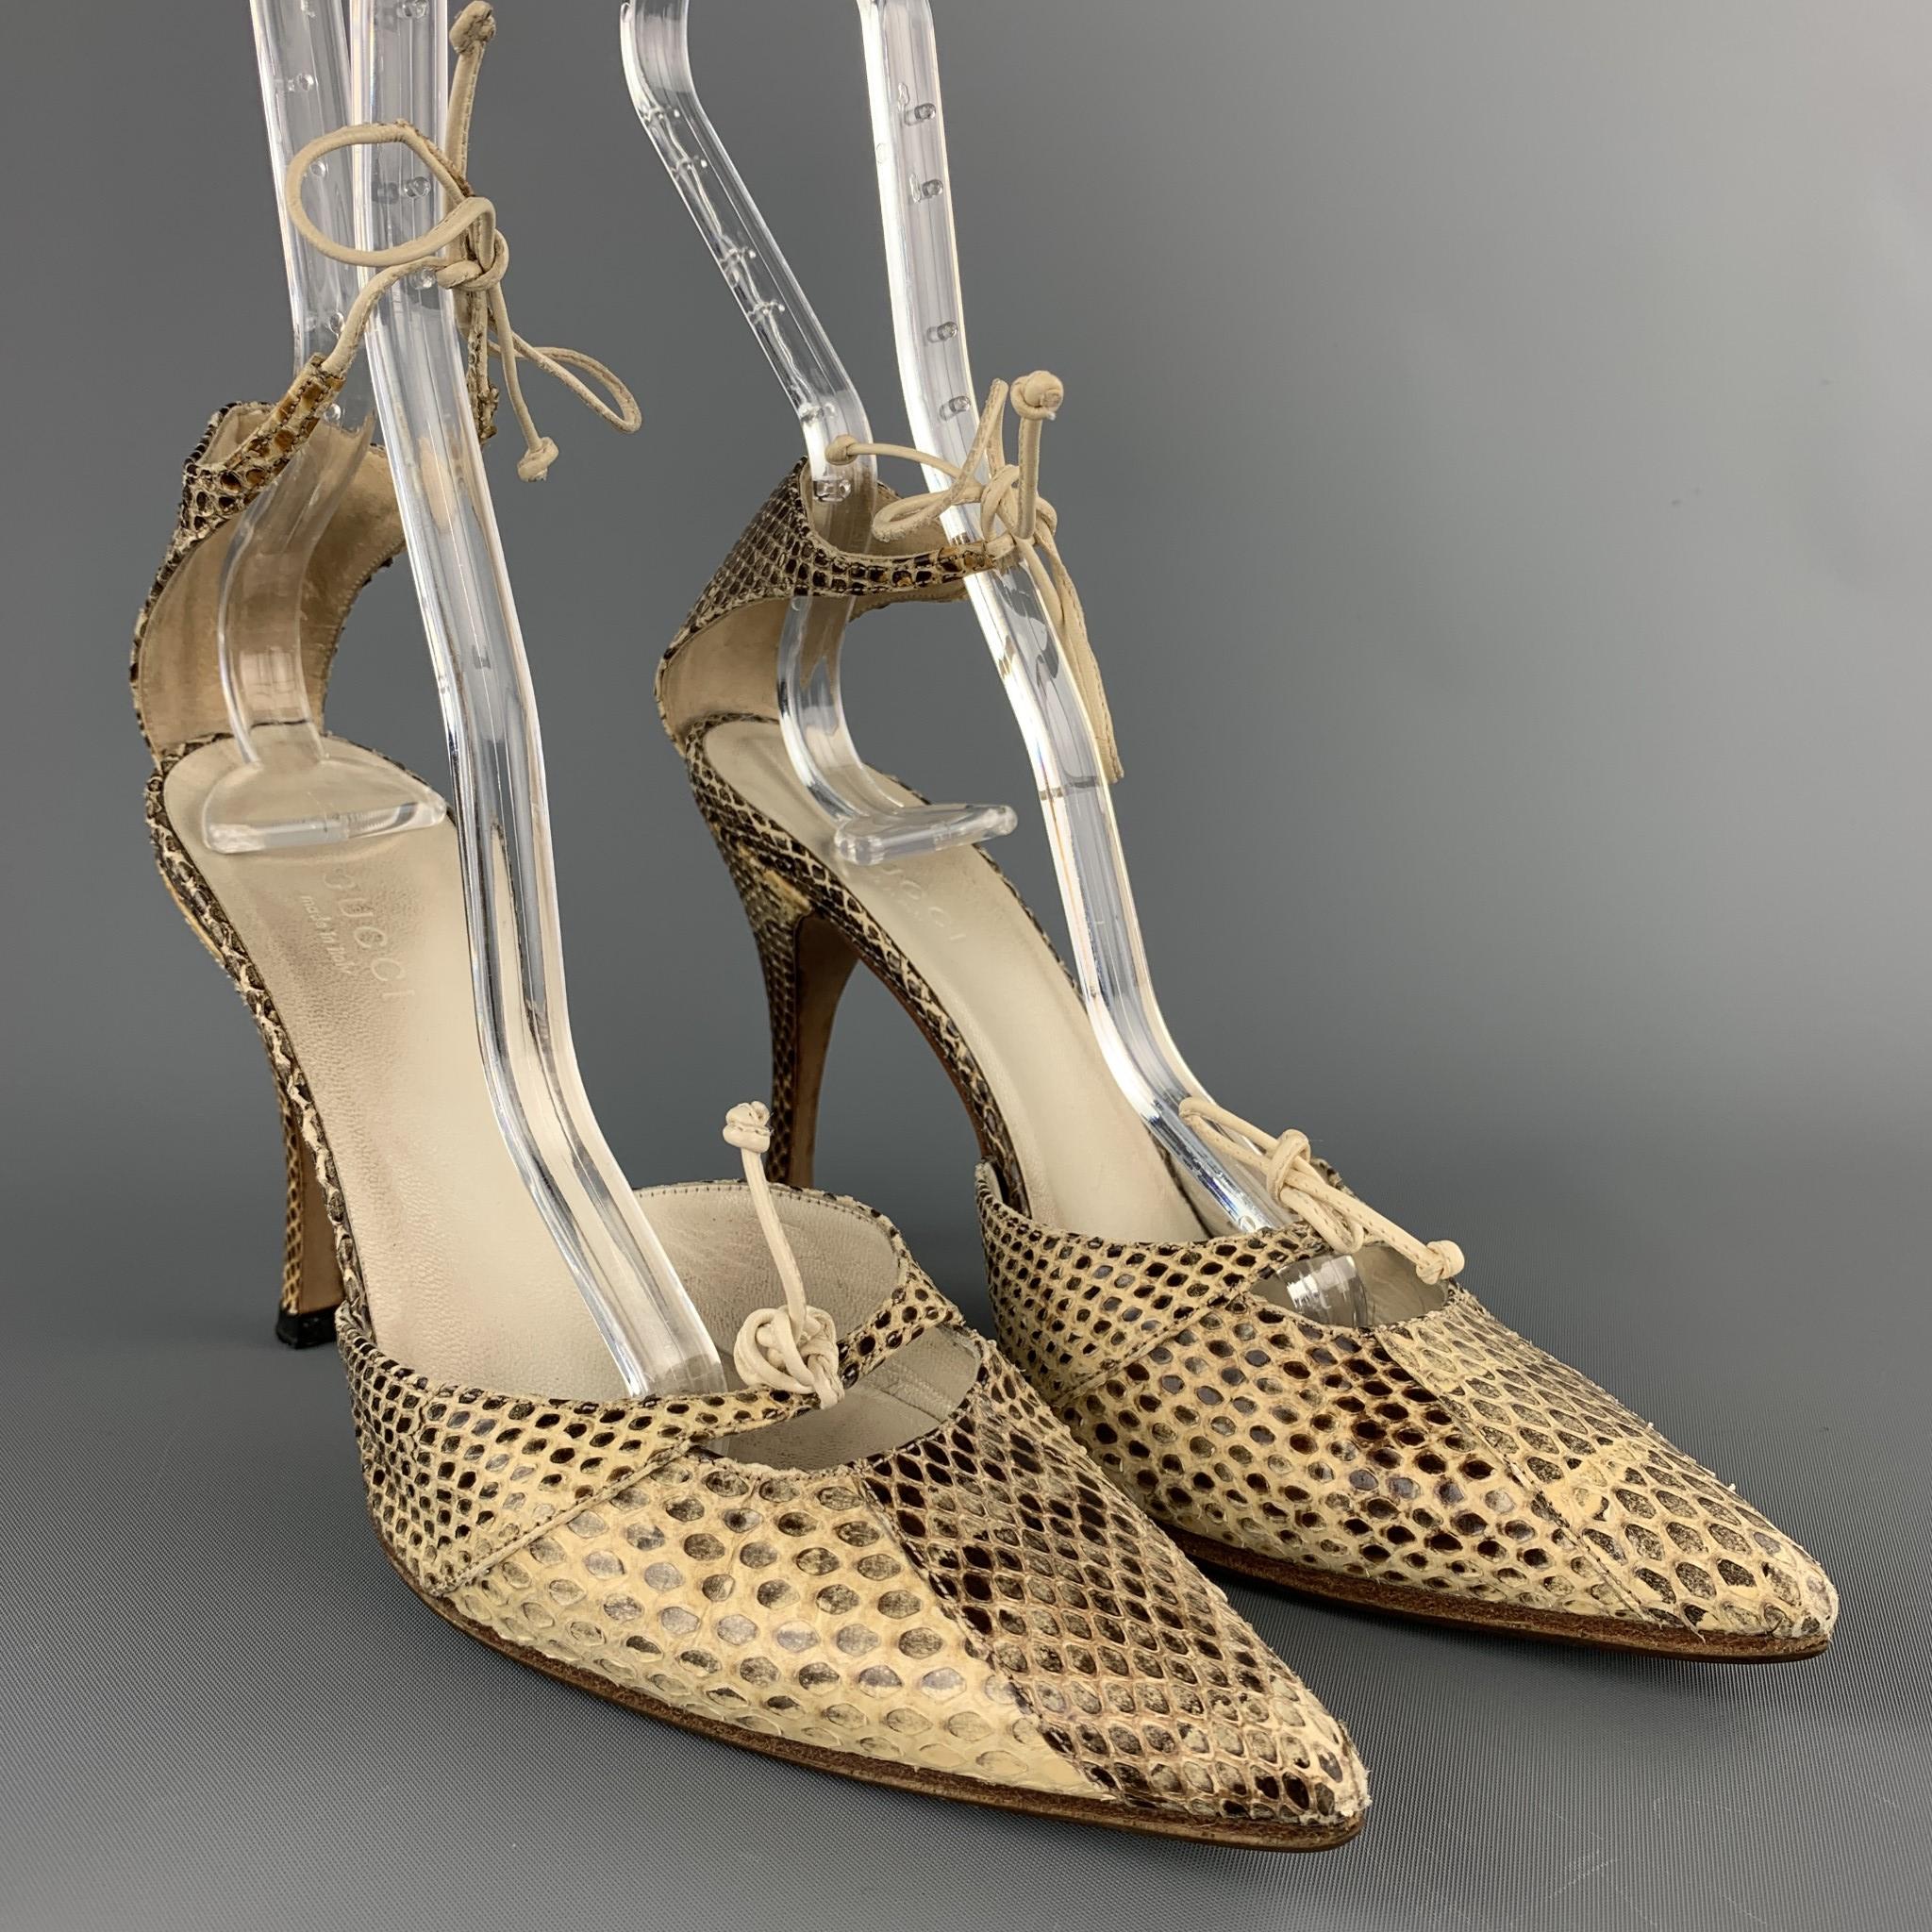 GUCCI pumps comes in a beige snake skin featuring a pointed toe, front strap detail, and a ankle strap closure. Wear throughout. As-Is. Made in Italy.

Good Pre-Owned Condition.
Marked: IT 34 C 

Measurements:

Heel: 3.5 in. 